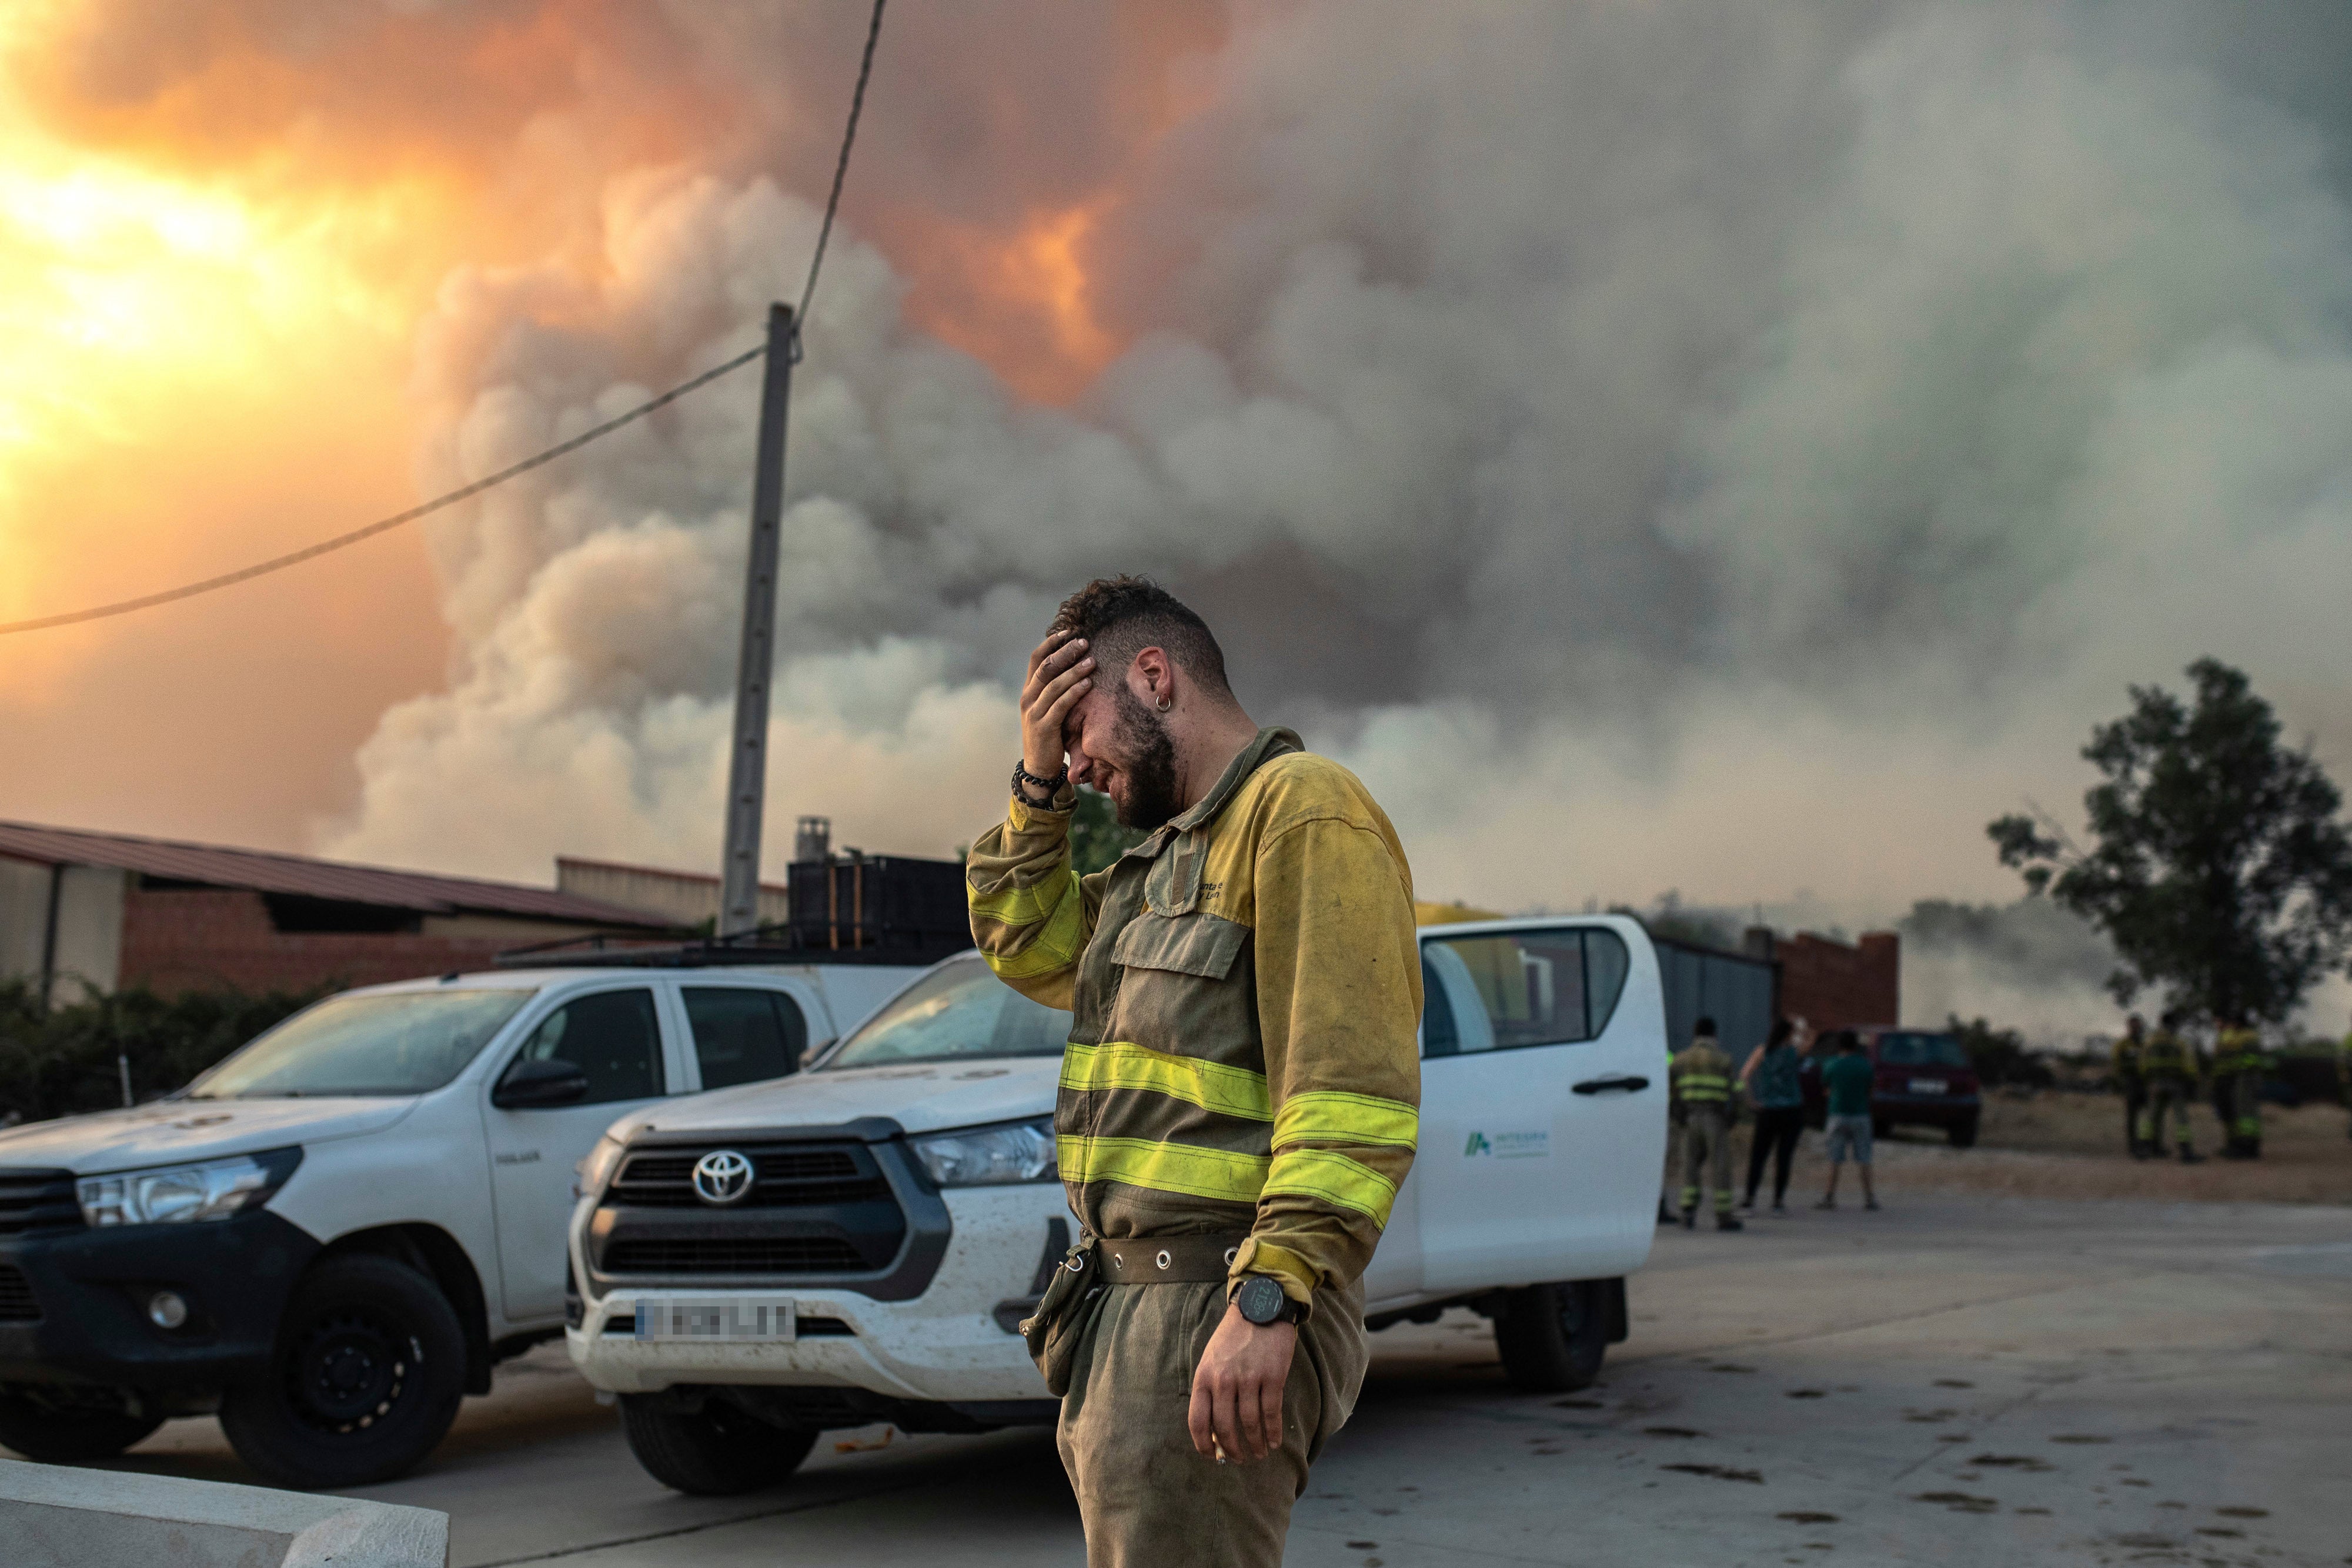 A firefighter cries while fighting a blaze in the Losacio area of Spain on July 17, 2022. (Photo: Emilio Fraile/Europa Press, AP)